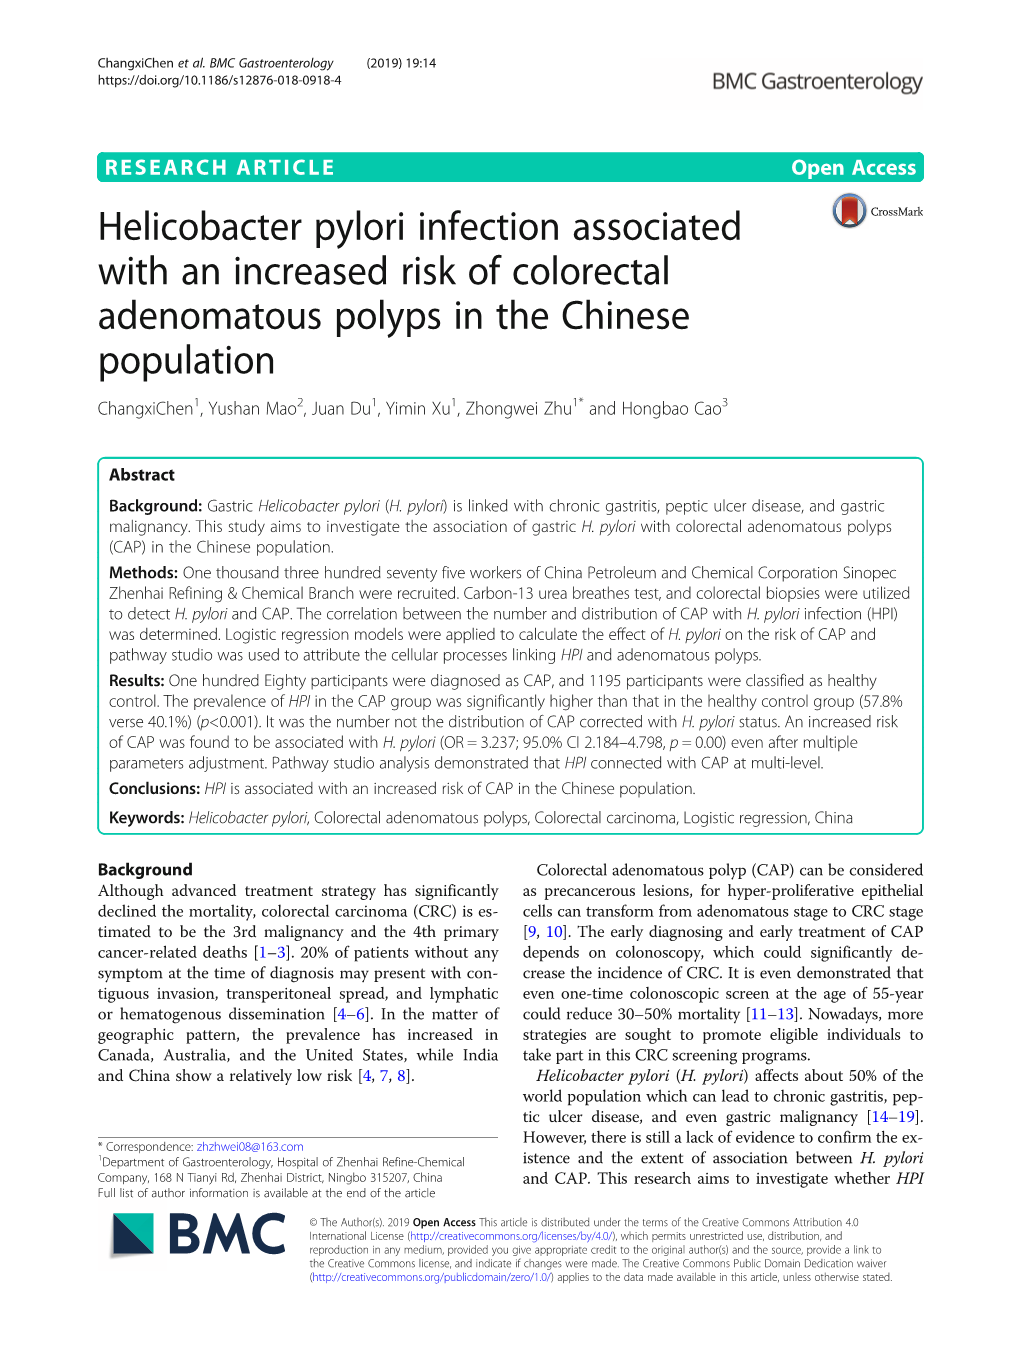 Helicobacter Pylori Infection Associated with an Increased Risk Of